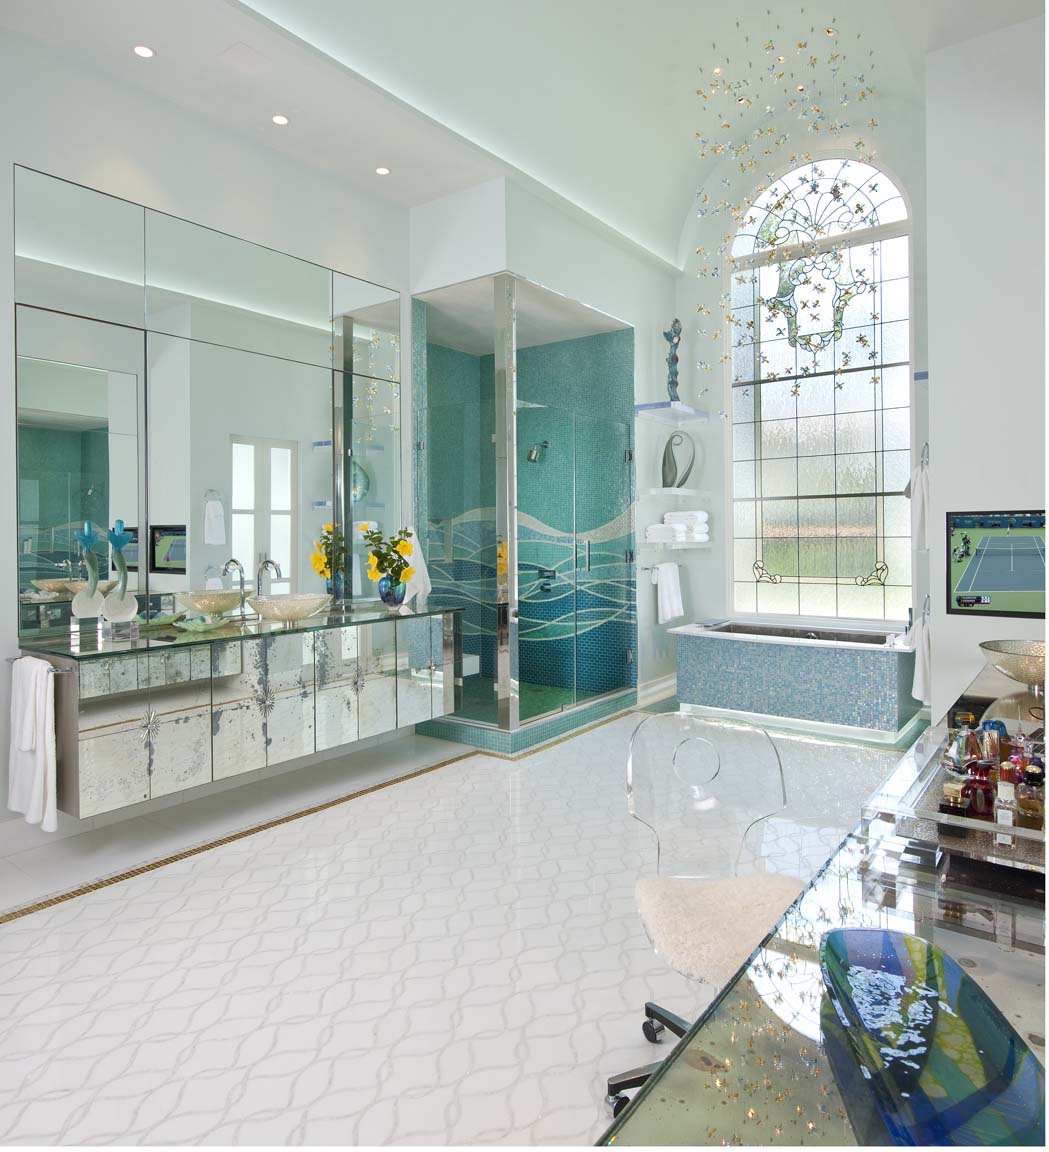  Won 1st place in Master Bathroom in Legacy of Design 2015 